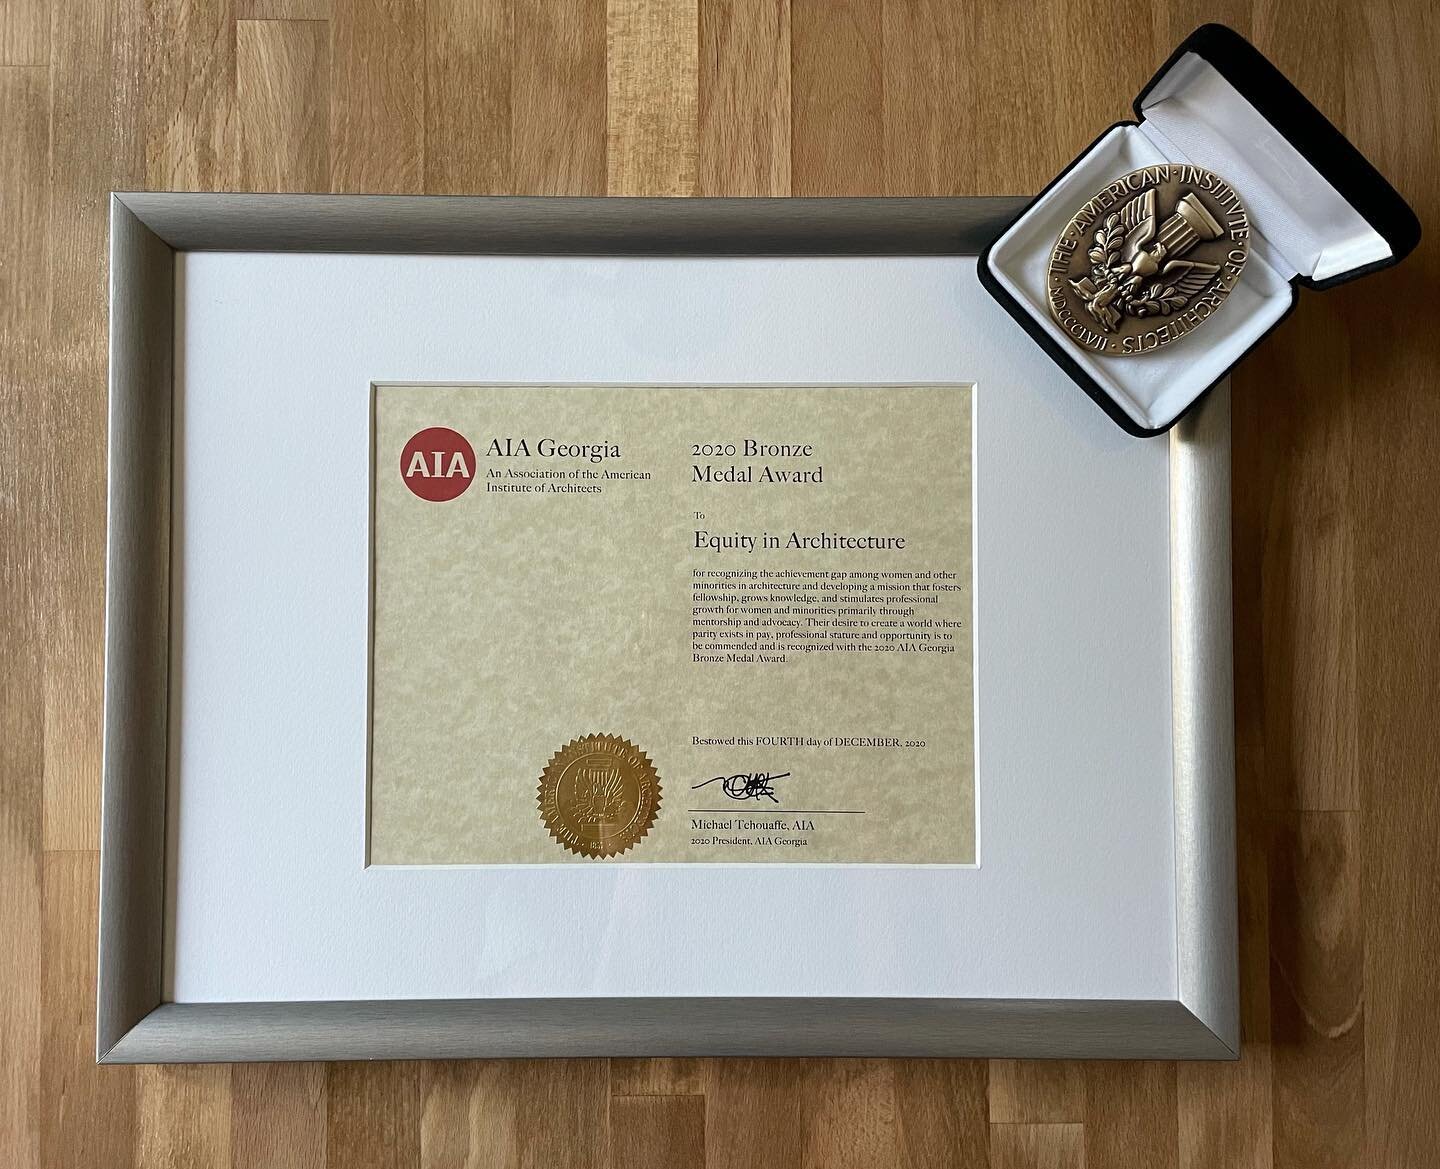 EQIA is pleased to announce that we won the 2020 AIA Georgia Bronze Medal Award! This honor recognizes our work to promote gender equity in the AEC community, equity in pay, access, and treatment.  We are so grateful for this recognition of our volun